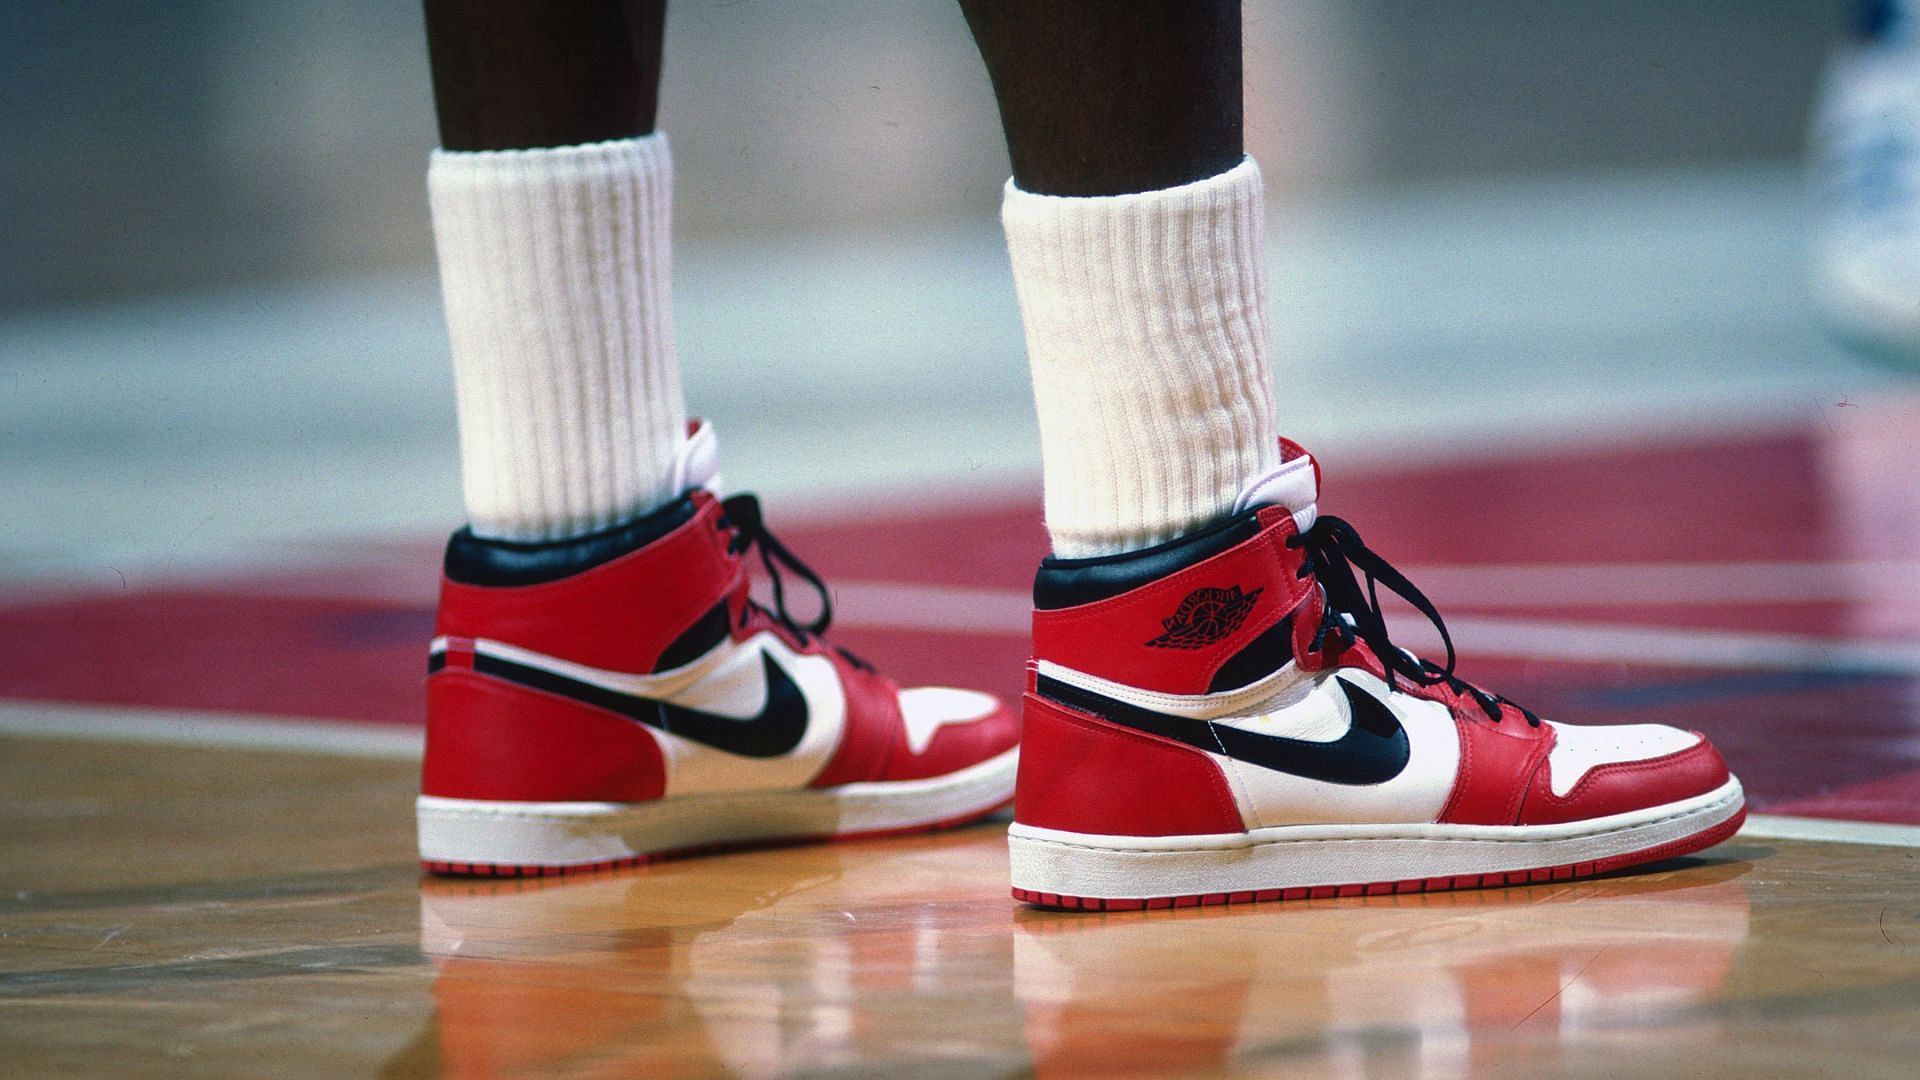 The of Michael shoes brand “Air Jordan” in the rise of Nike as a shoe giant